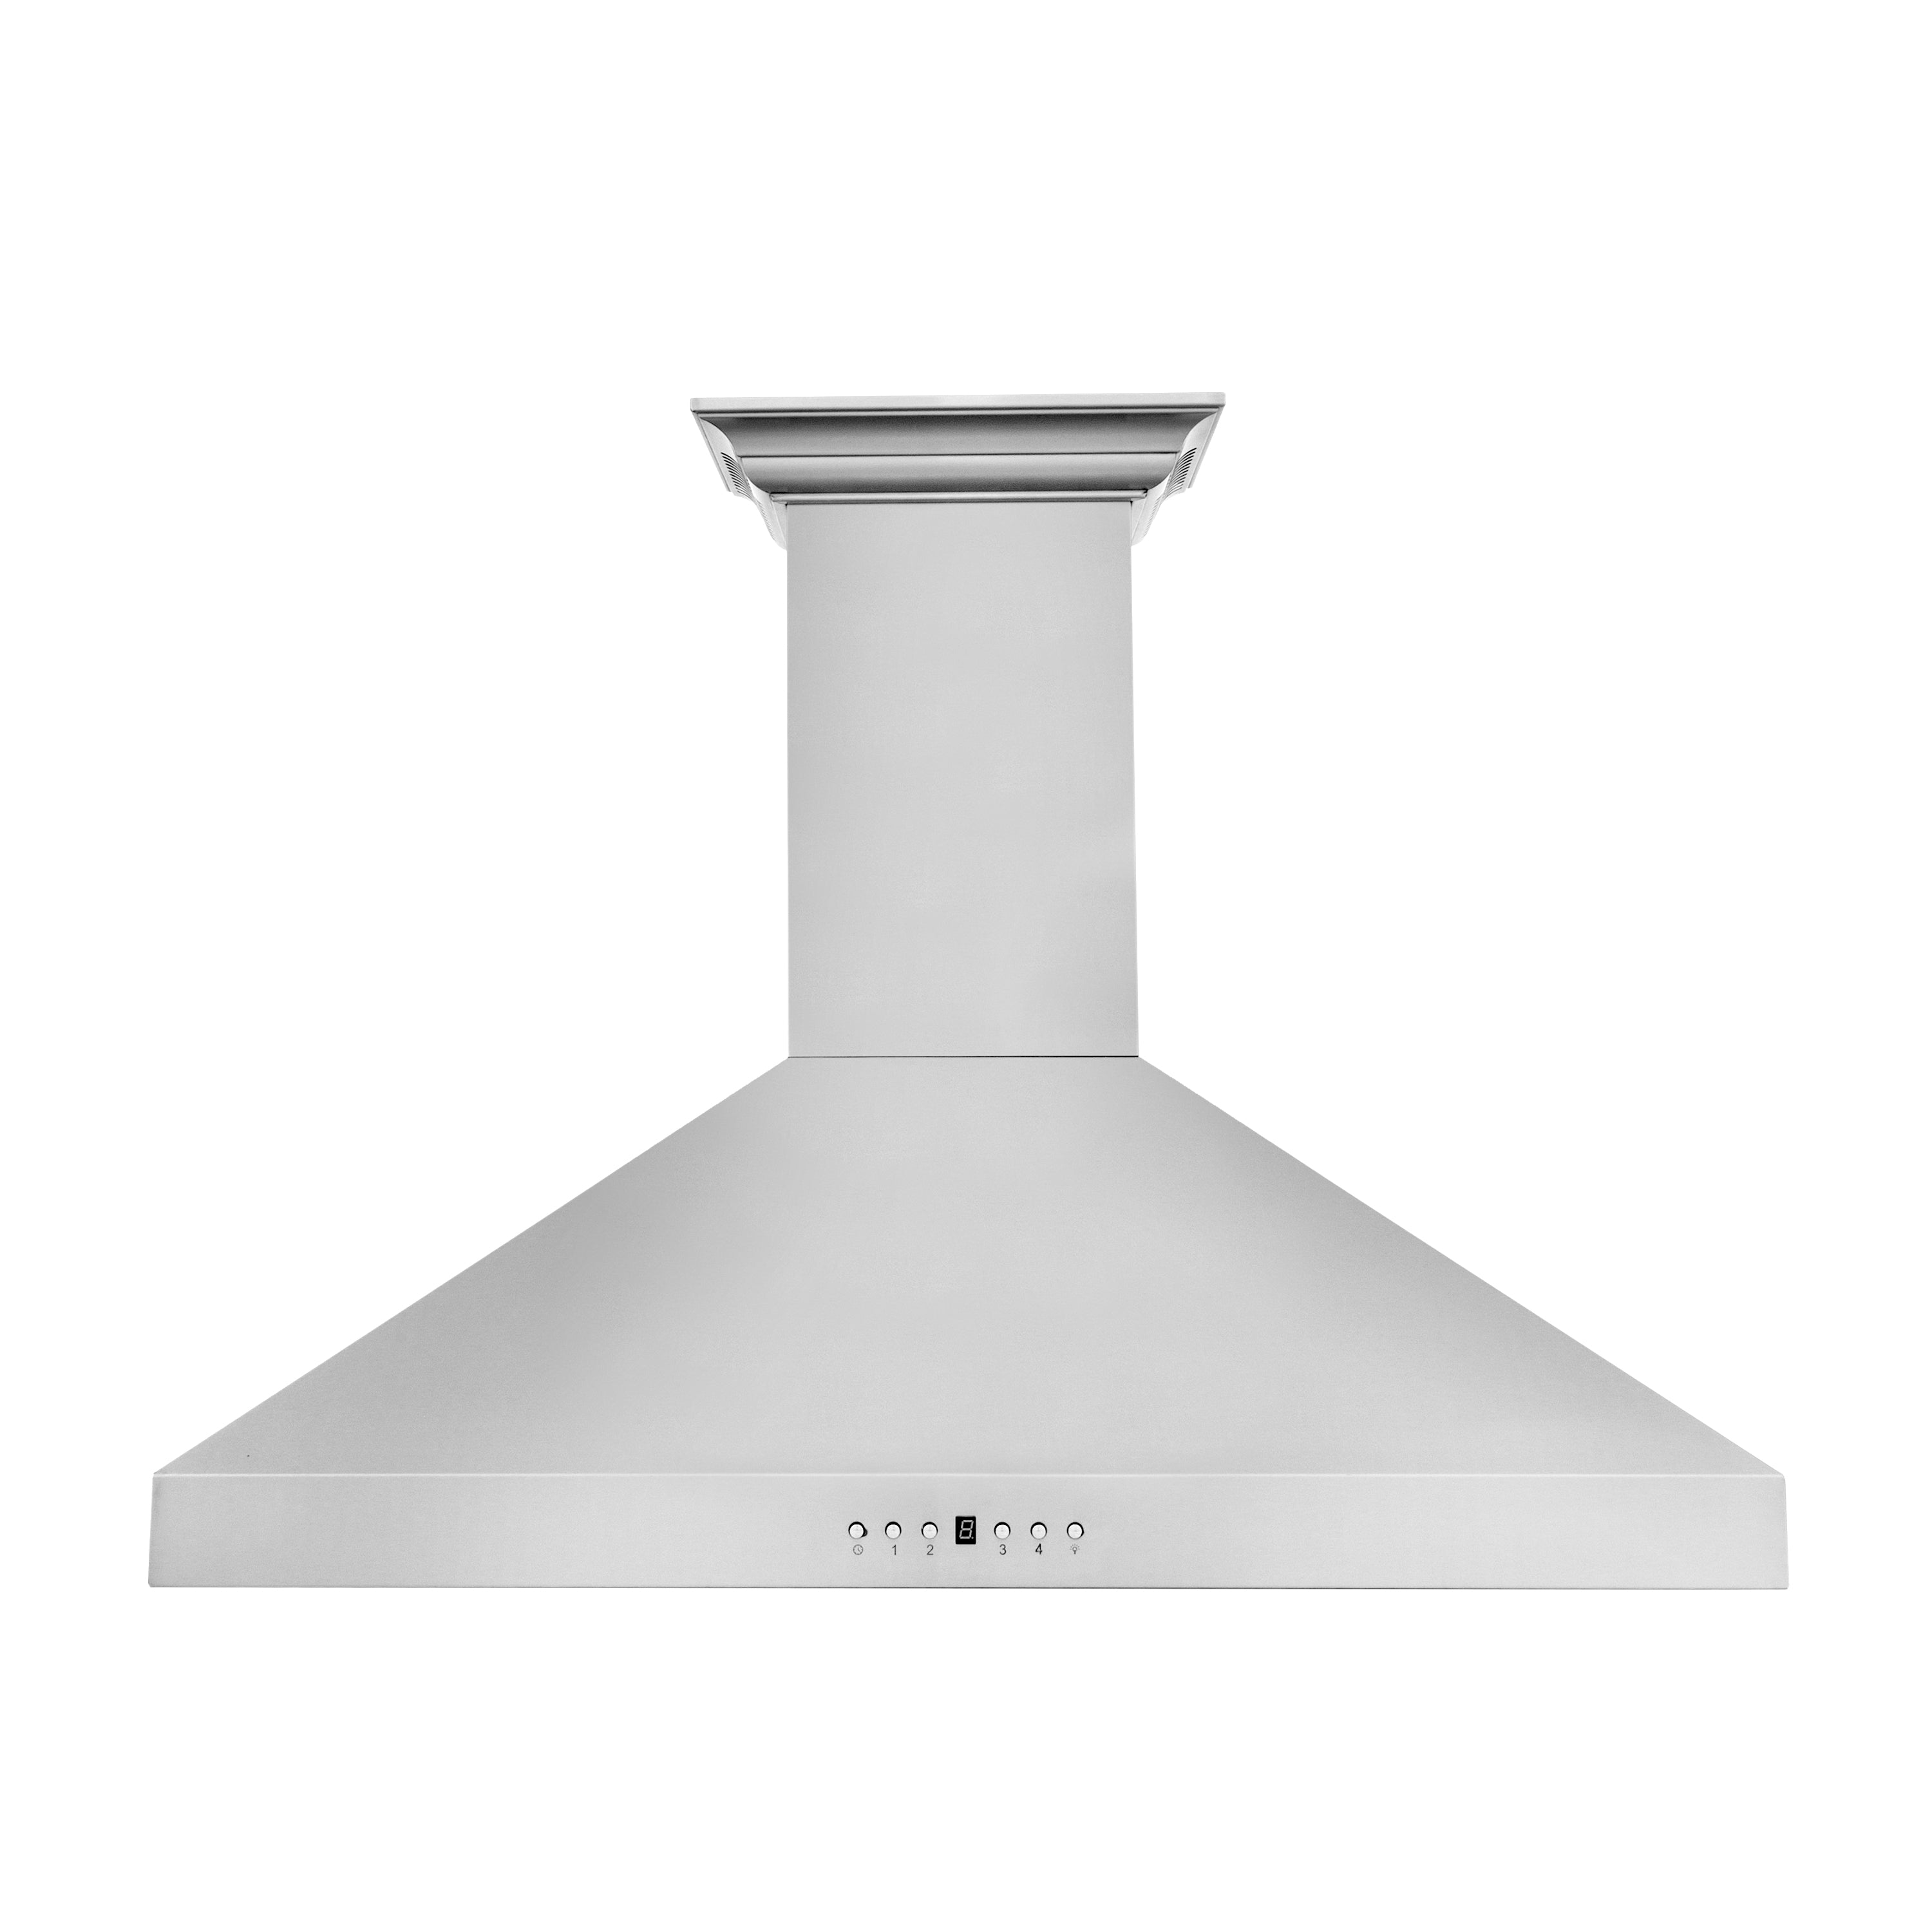 36" ZLINE CrownSound√∞ Ducted Vent Wall Mount Range Hood in Stainless Steel with Built-in Bluetooth Speakers (KL3CRN-BT-36)